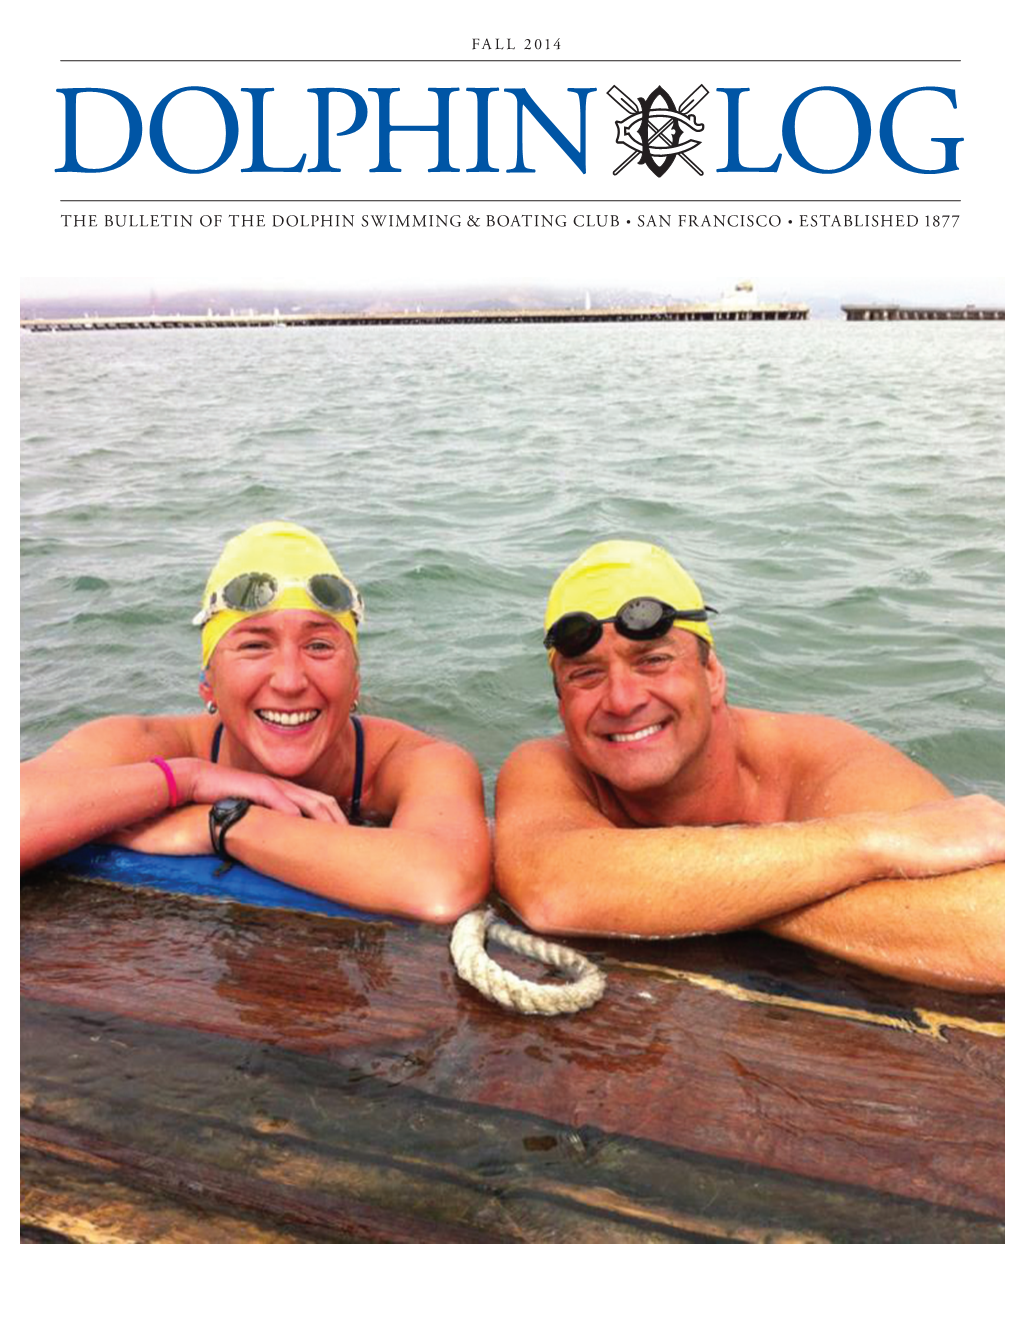 The Bulletin of the Dolphin Swimming & Boating Club